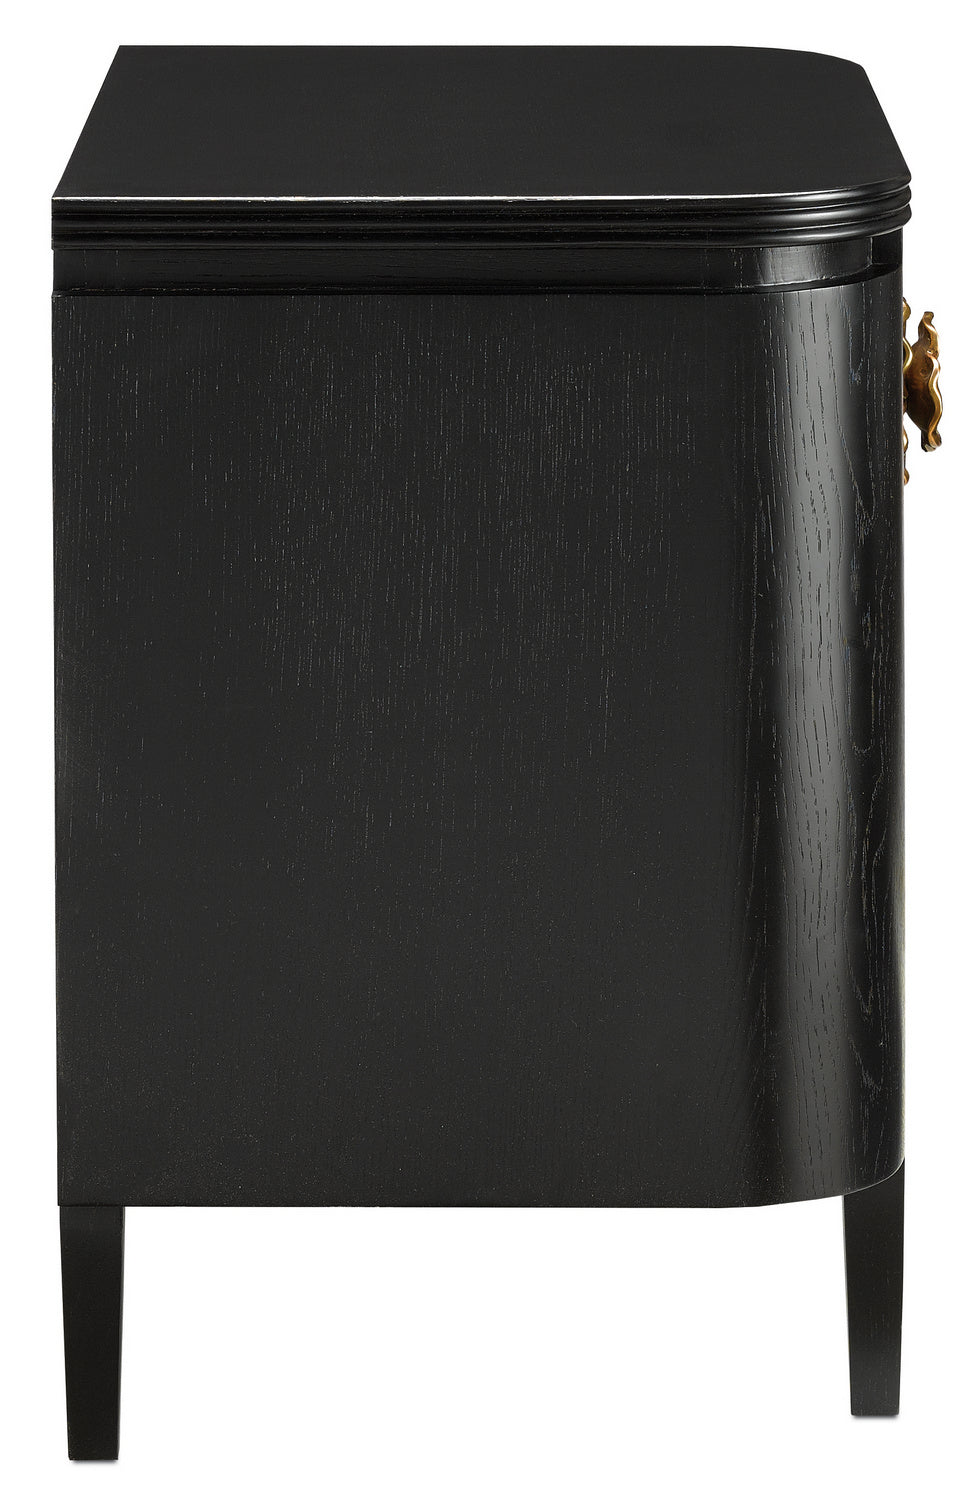 Nightstand from the Briallen collection in Caviar Black/Antique Brass finish